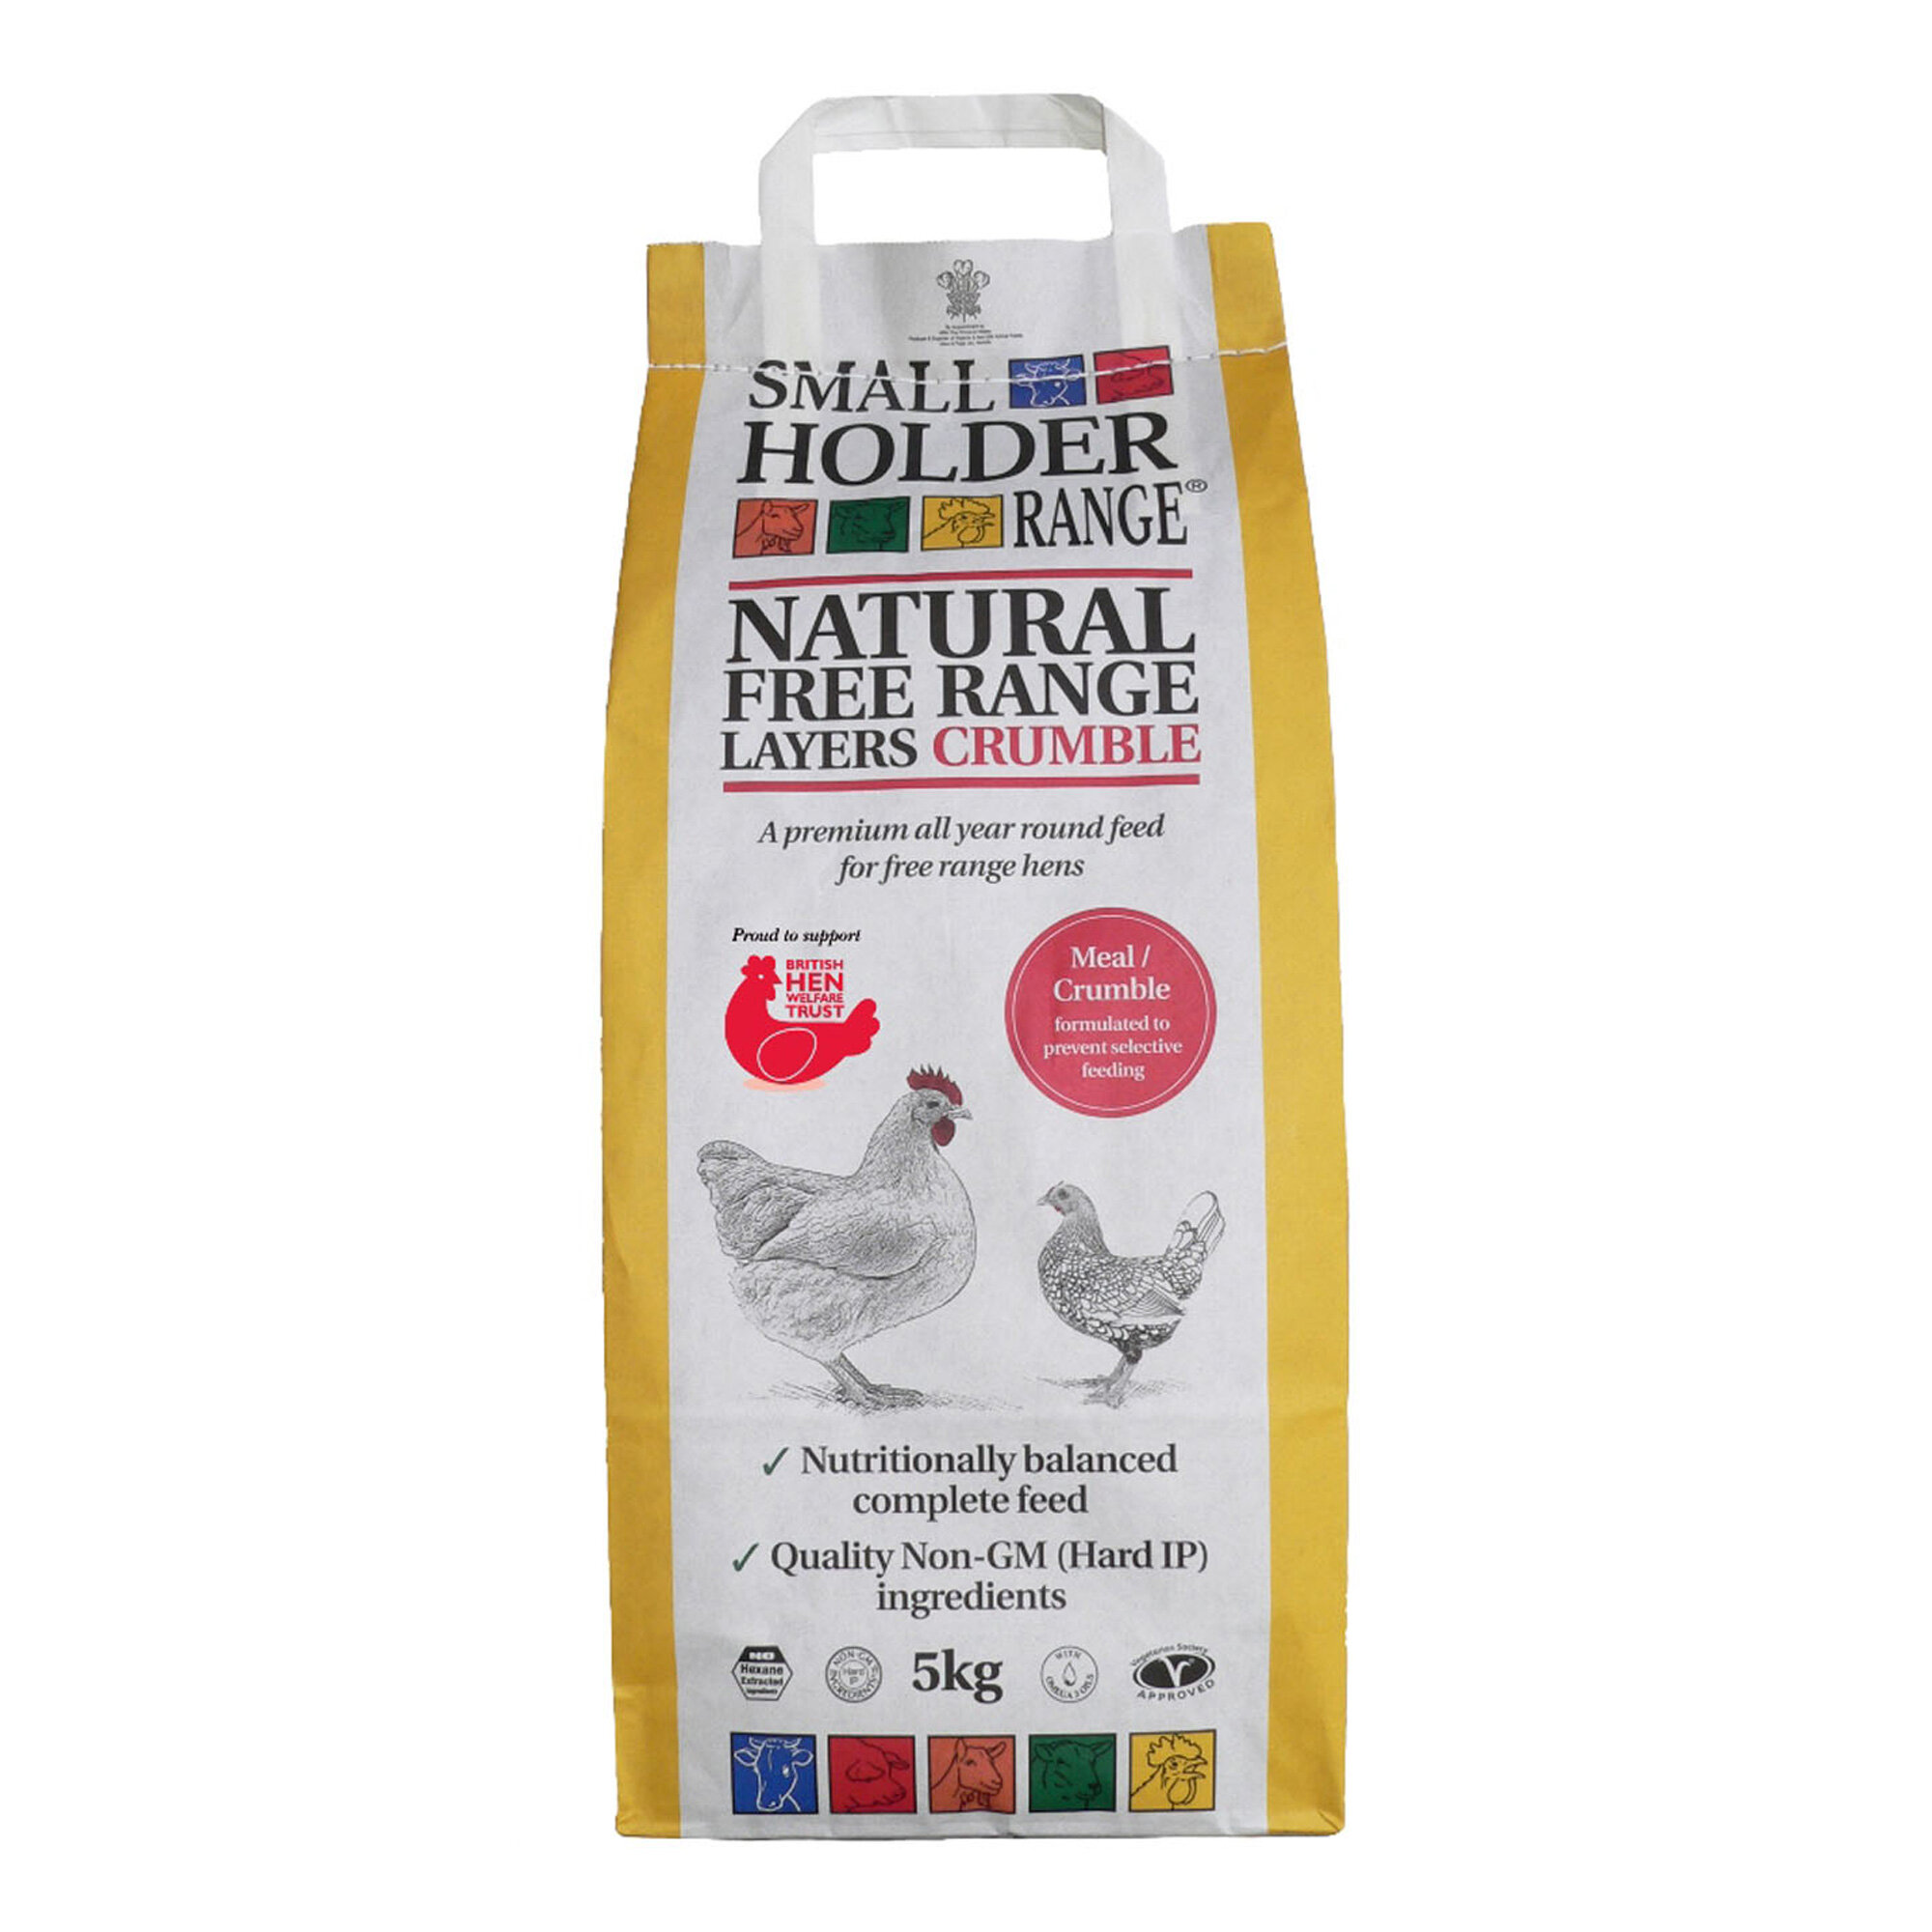 Allen & Page Small Holder Range Natural Free Range Layers Crumble Poultry Food 5kg